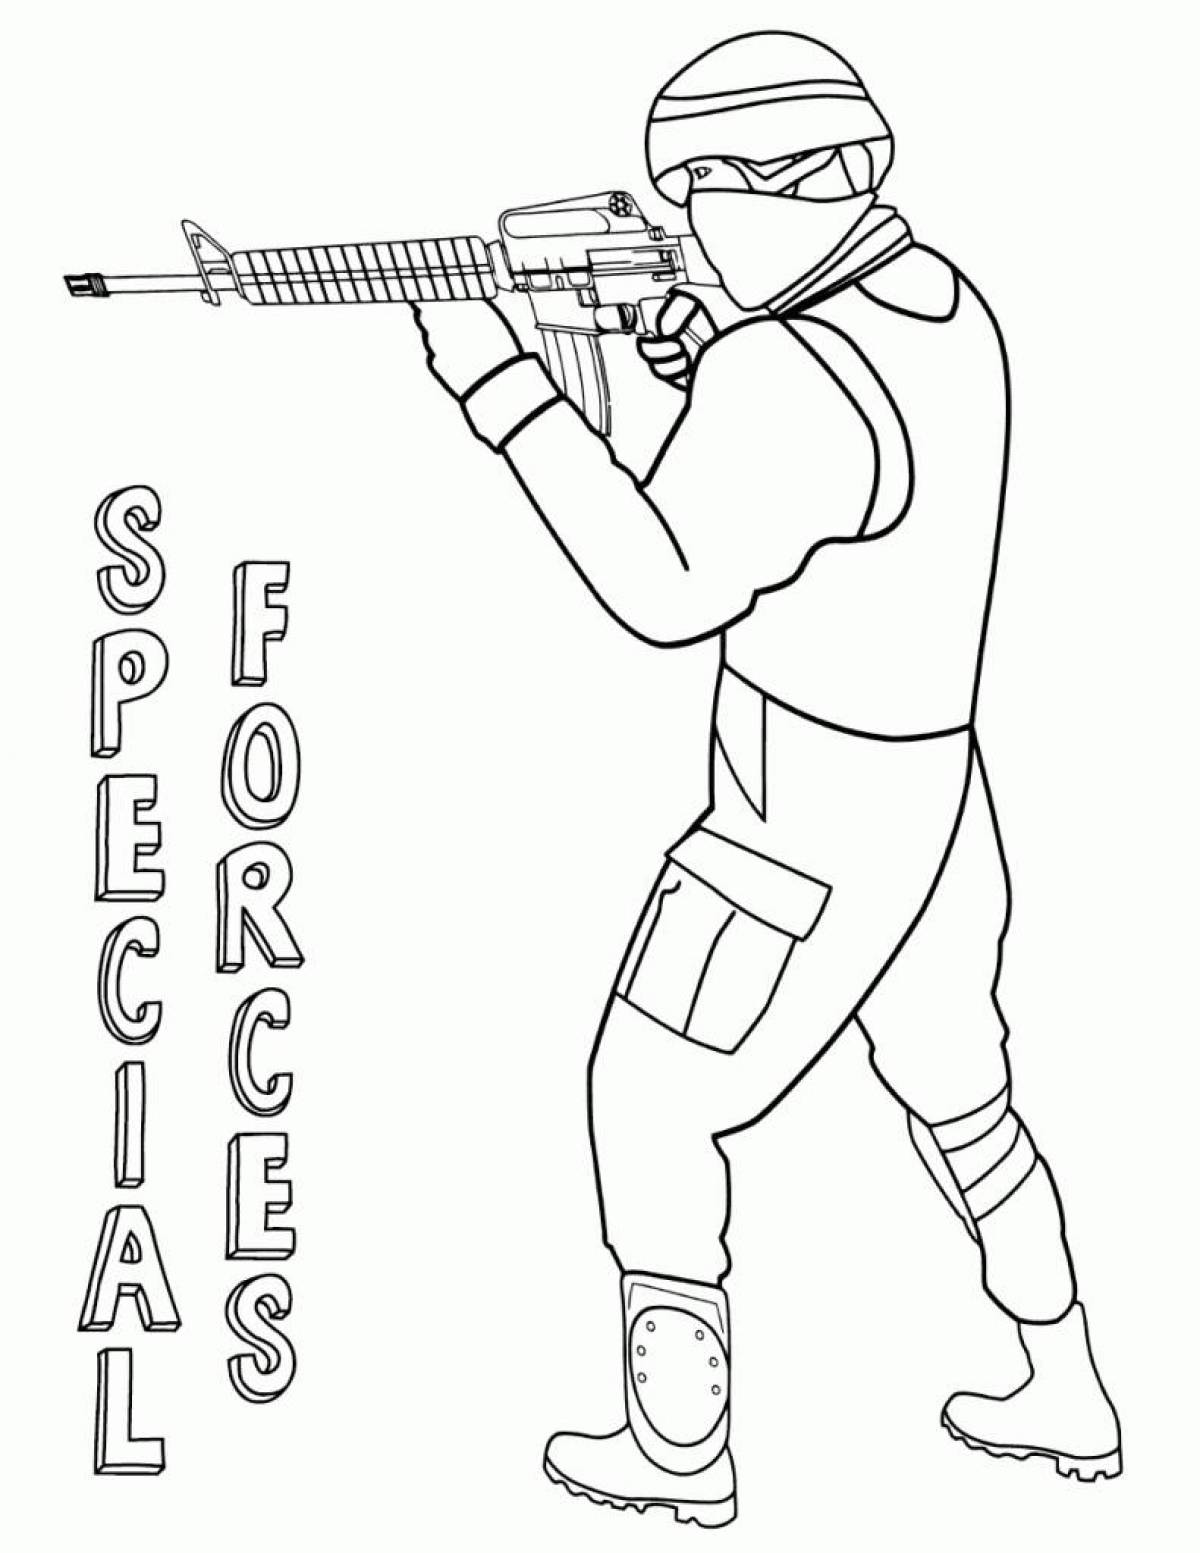 Special forces coloring page